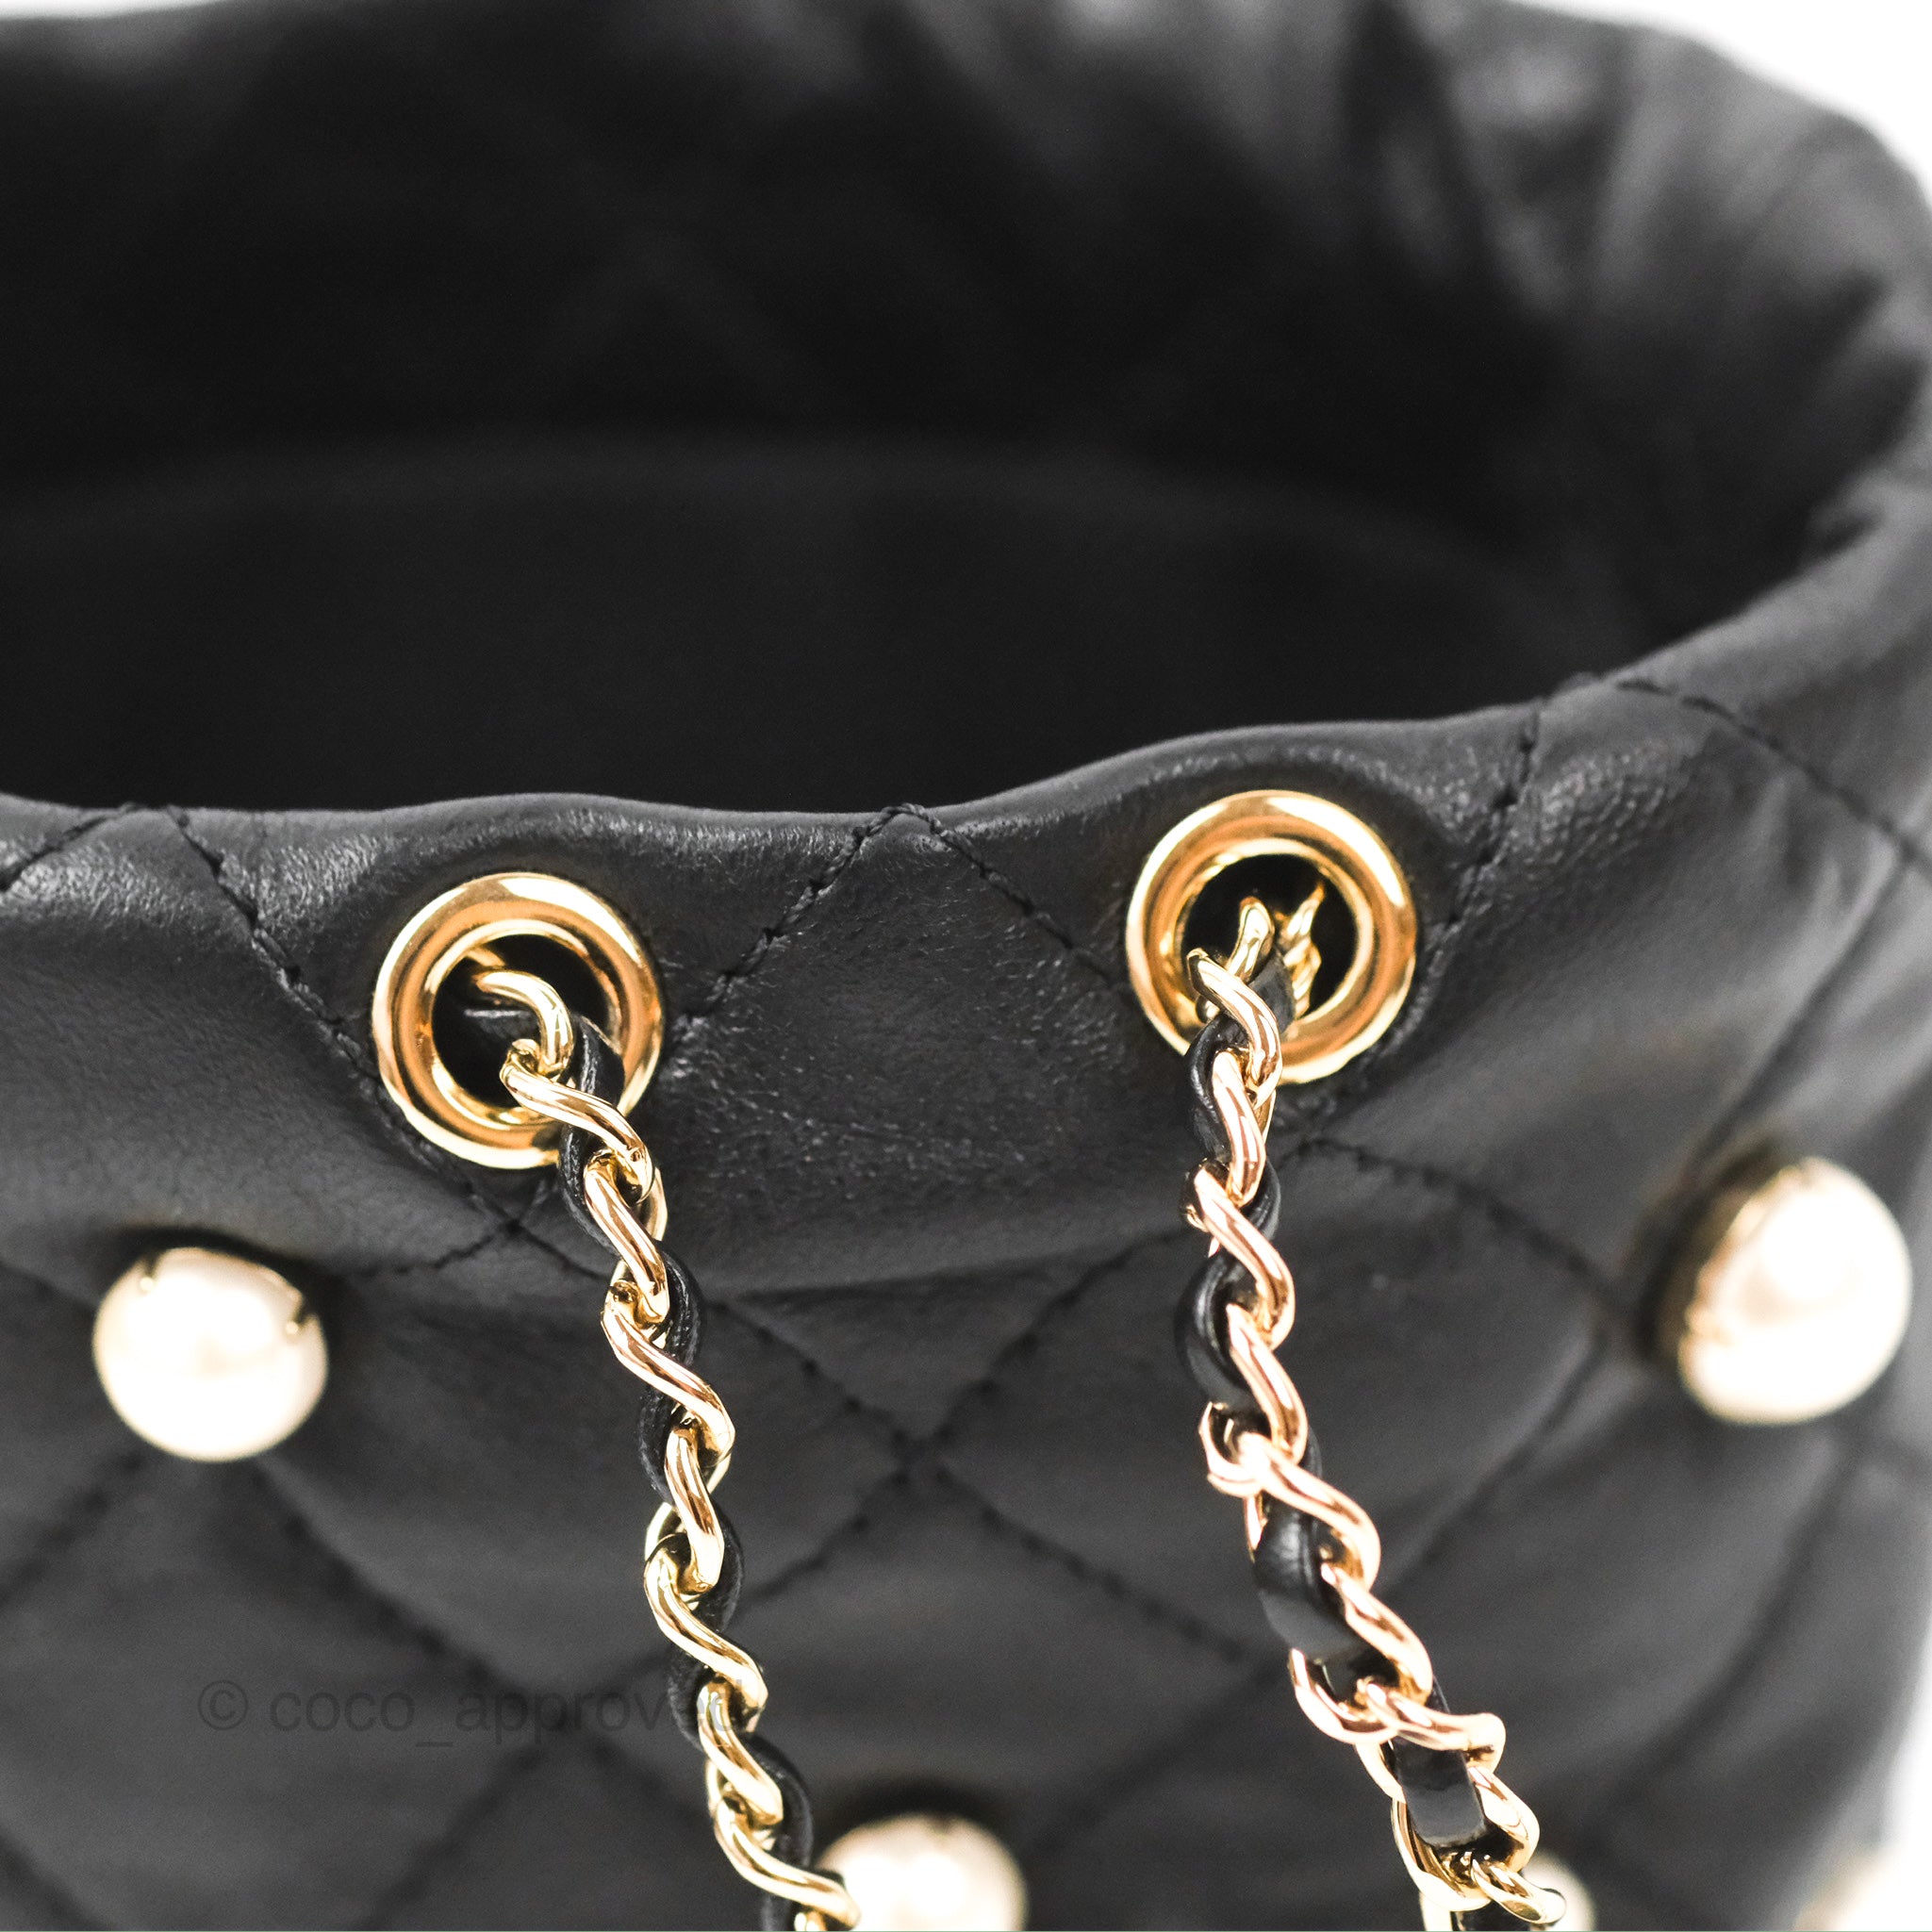 Chanel Quilted Drawstring Pearl Flower Bucket Bag Black Lambskin Aged –  Coco Approved Studio